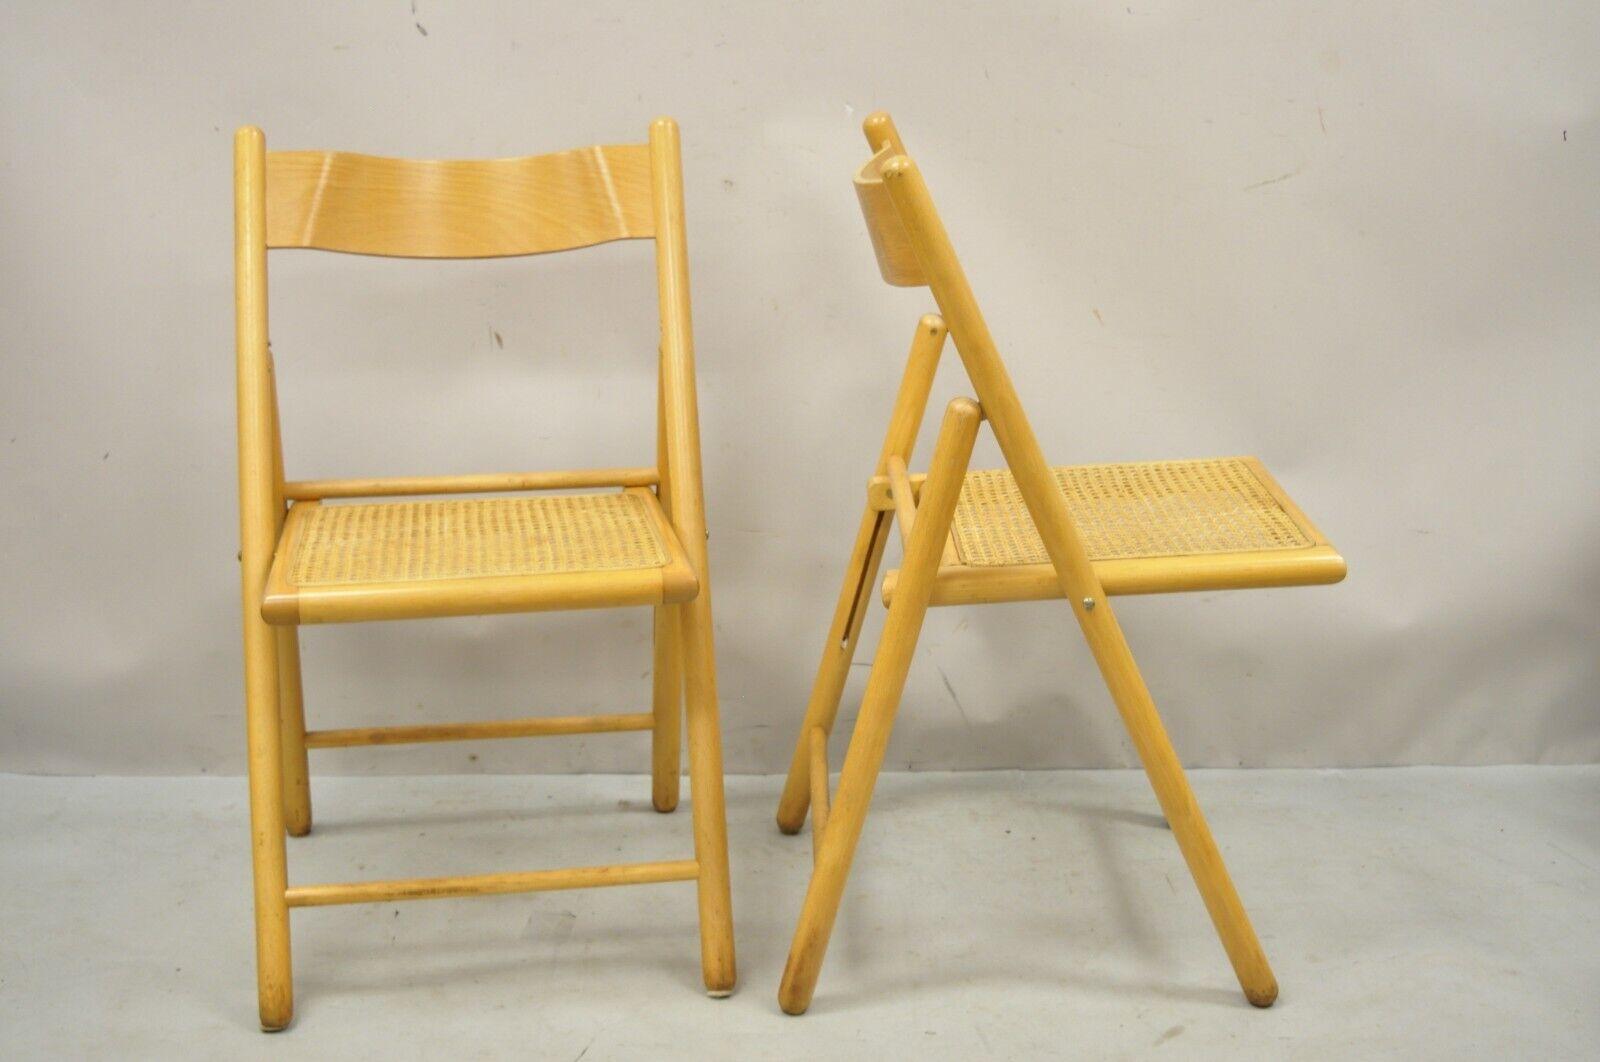 Vintage Habitat England Bentwood Cane Rattan Folding Chairs - a Pair. Item features shapely bentwood backs, cane seat, beautiful wood grain, very nice antique pair, clean modernist lines. Circa Mid to Late 20th Century.
Measurements: 
Open: 32